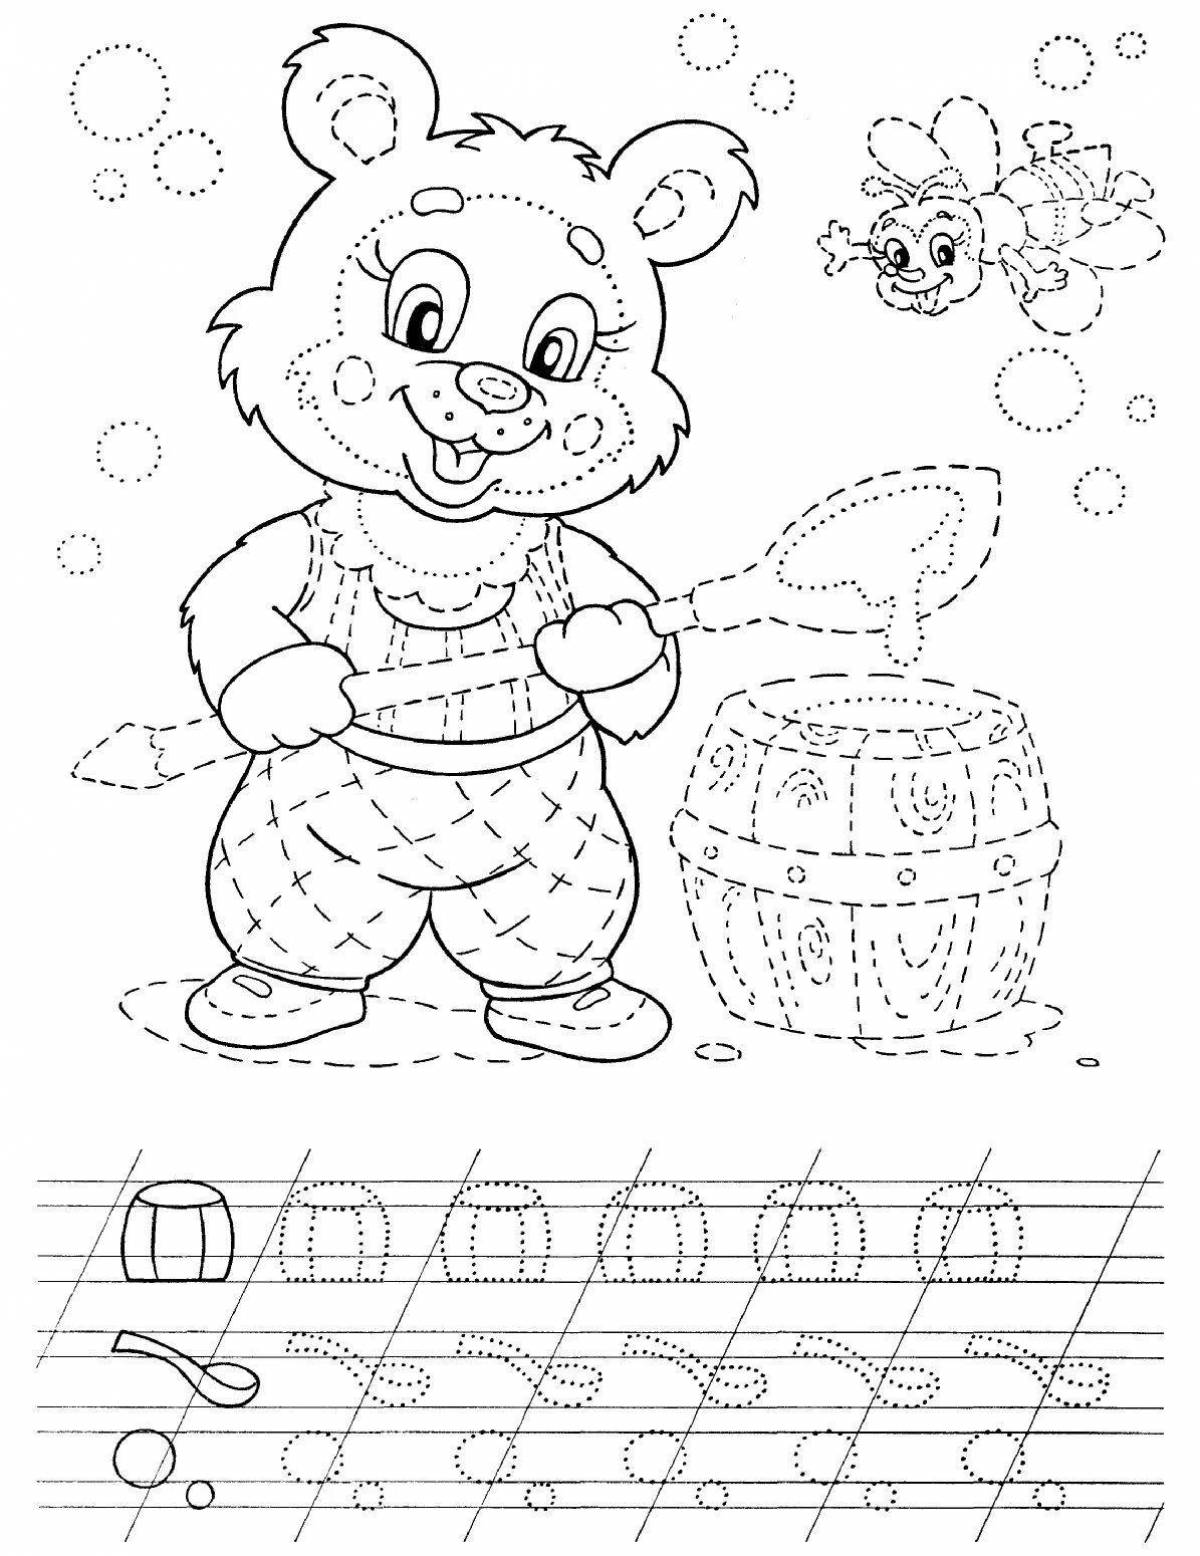 Recipe coloring page for 3-4 year olds